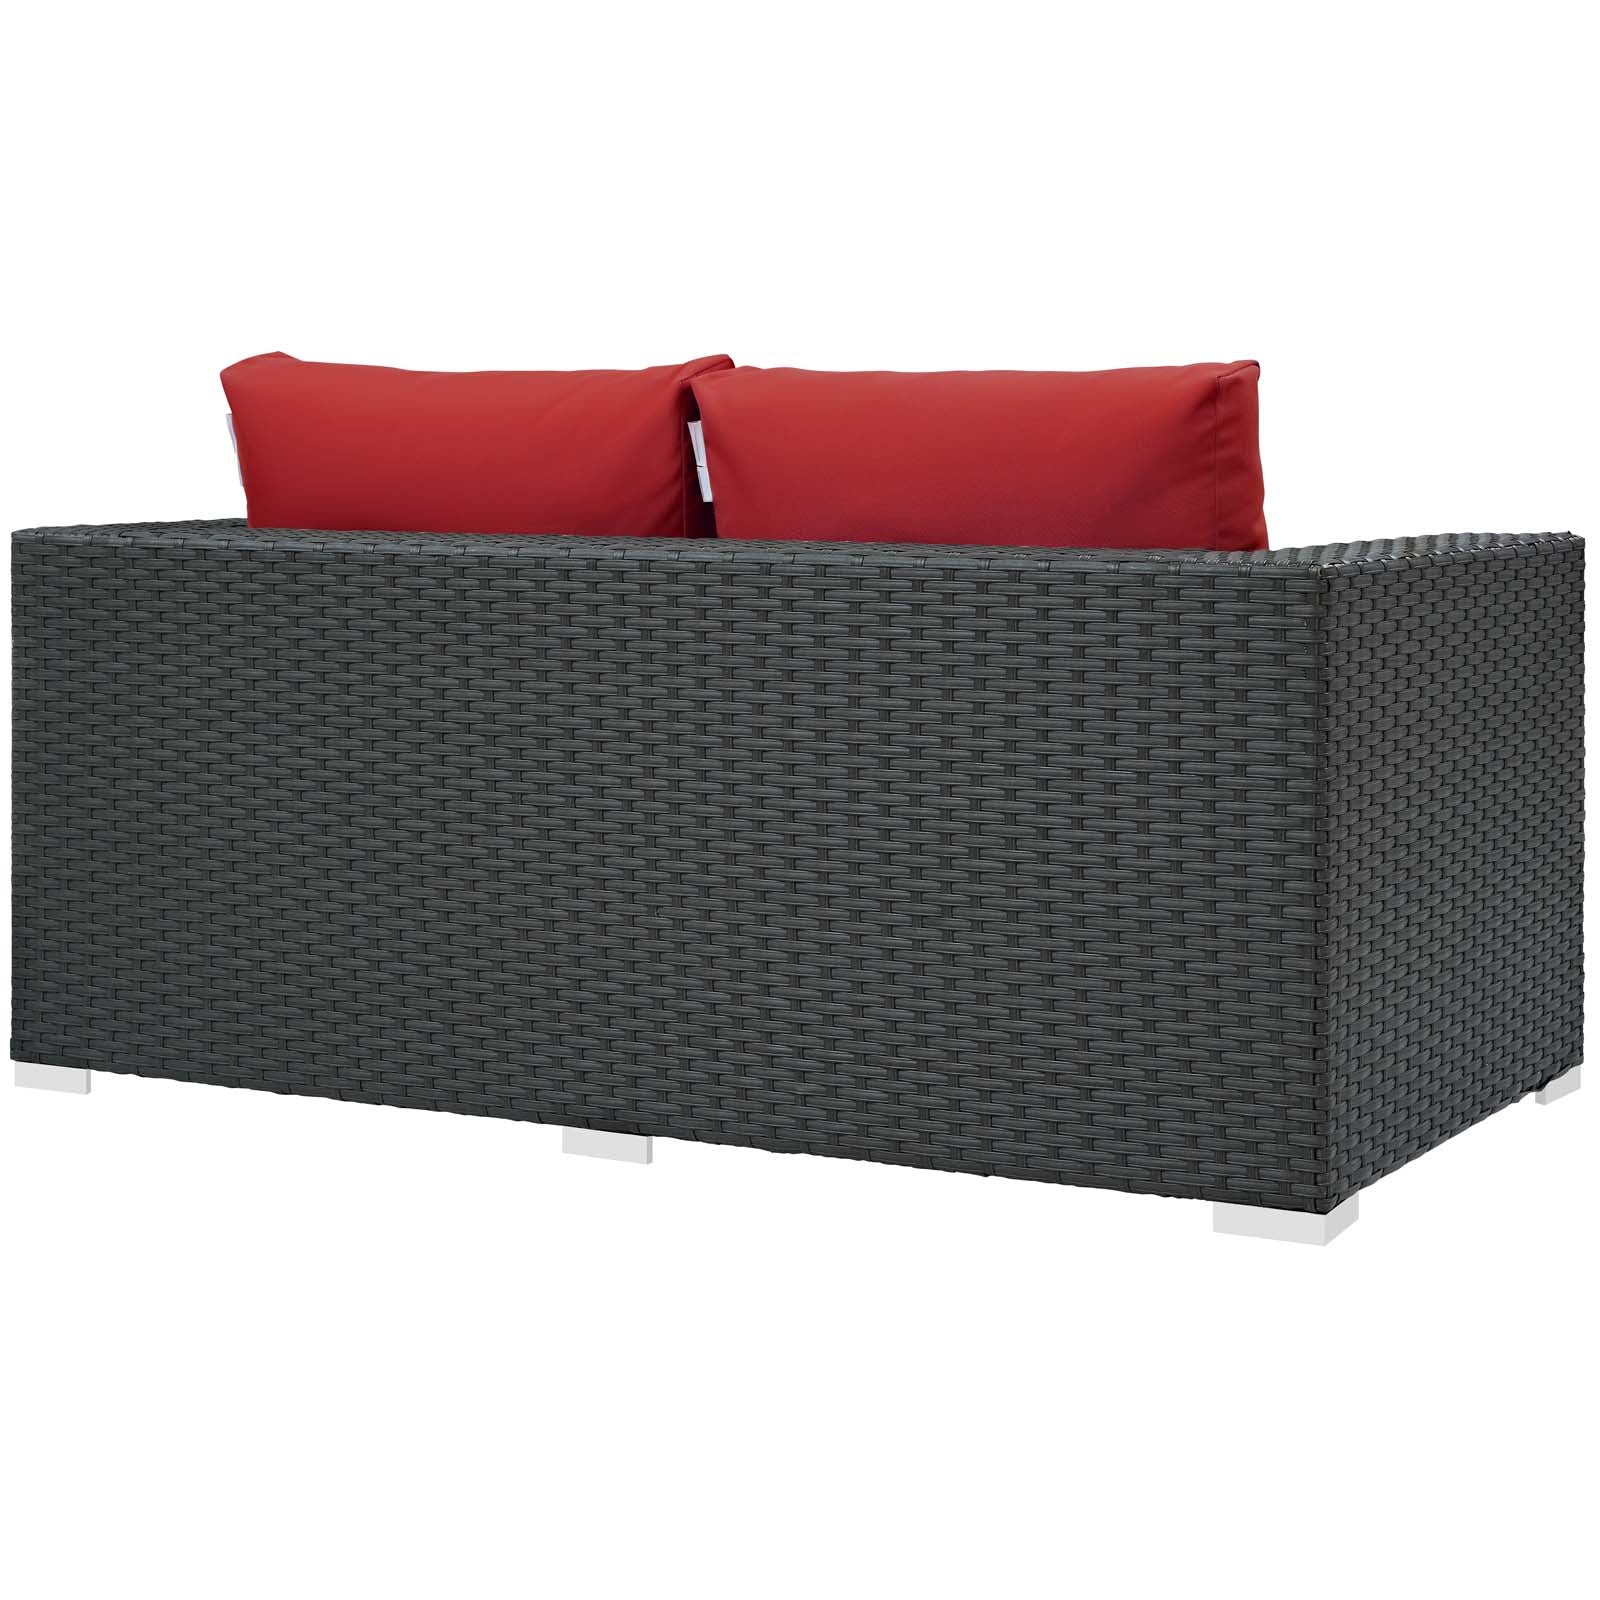 Modway Outdoor Sofas - Sojourn Outdoor Patio Sunbrella Loveseat Canvas Red